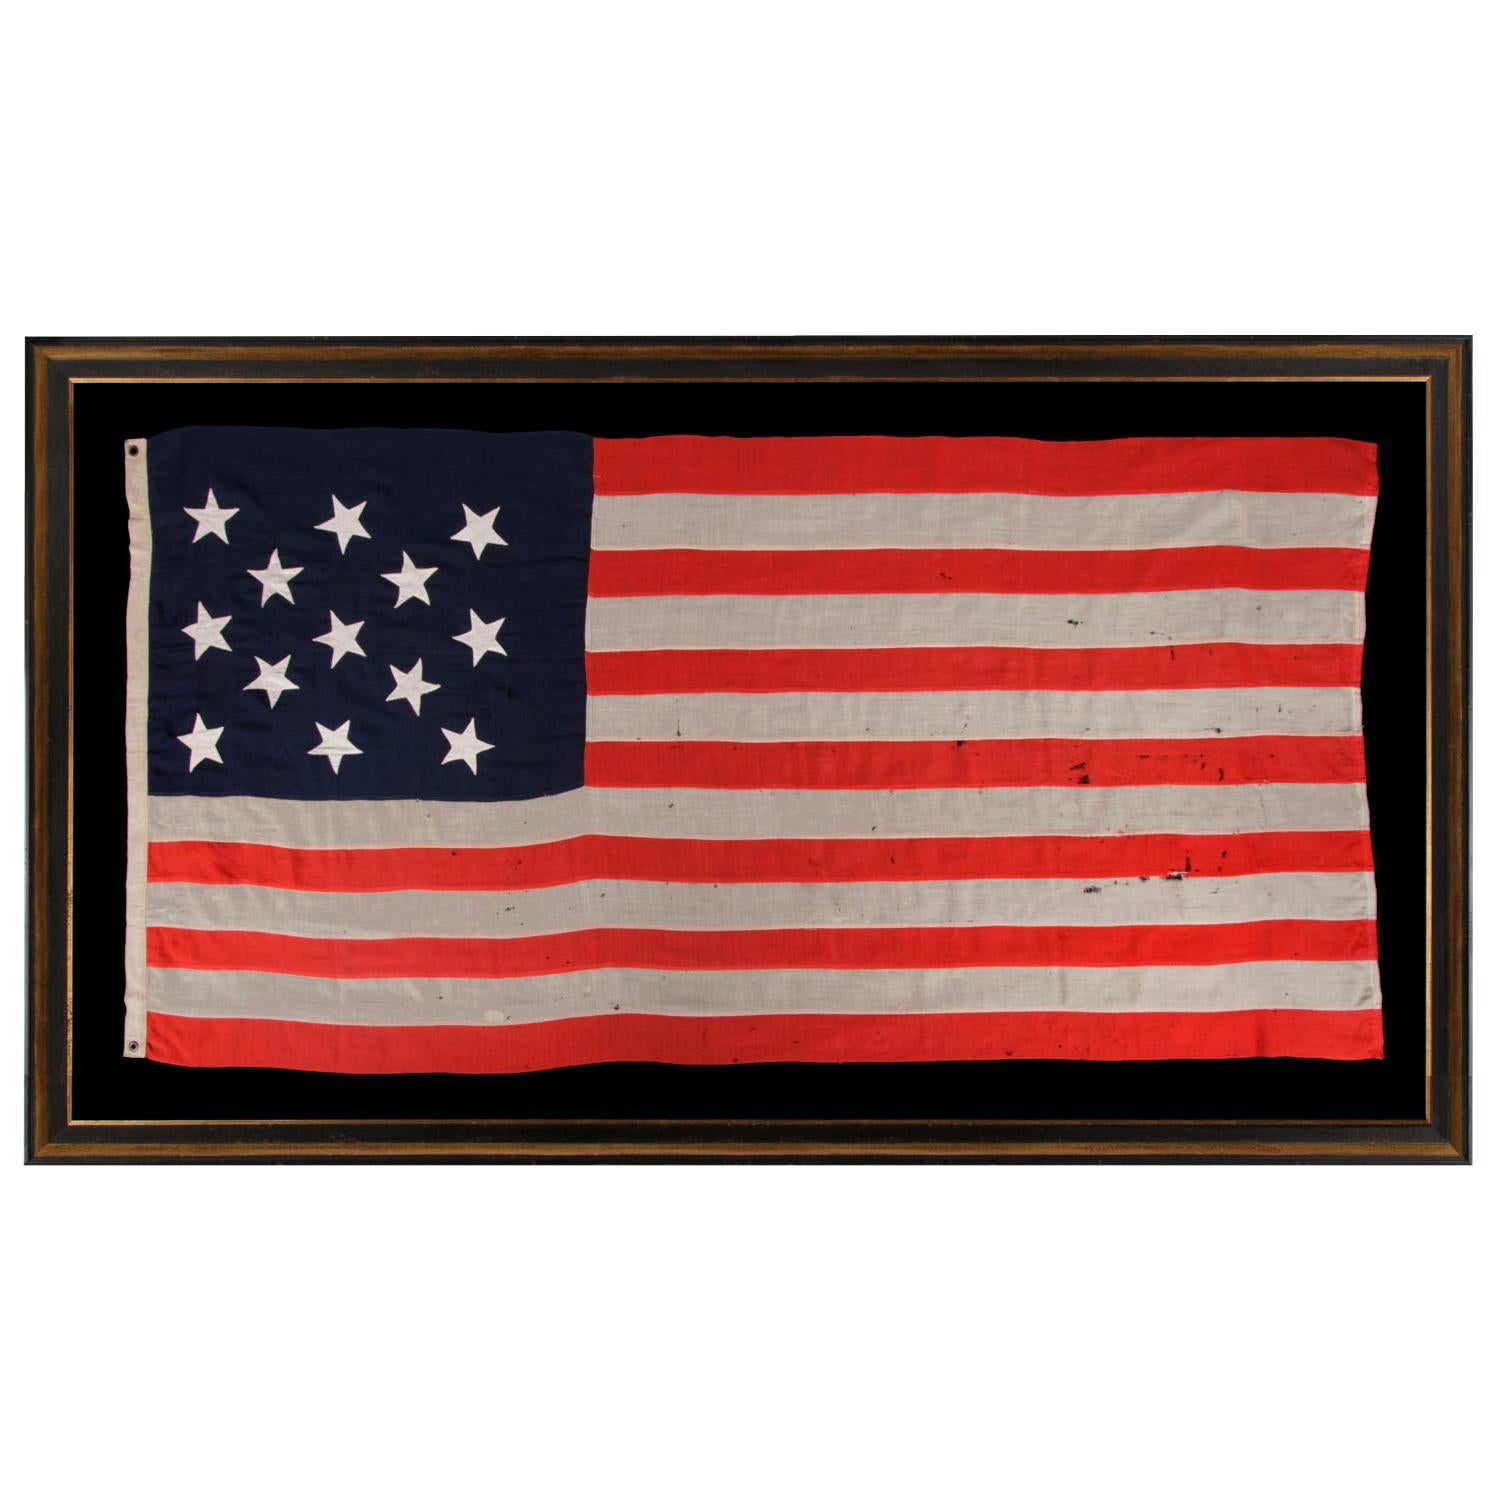 13 Stars in a 3-2-3-2-3 Pattern on a Large Scale American Flag, Circa 1890's